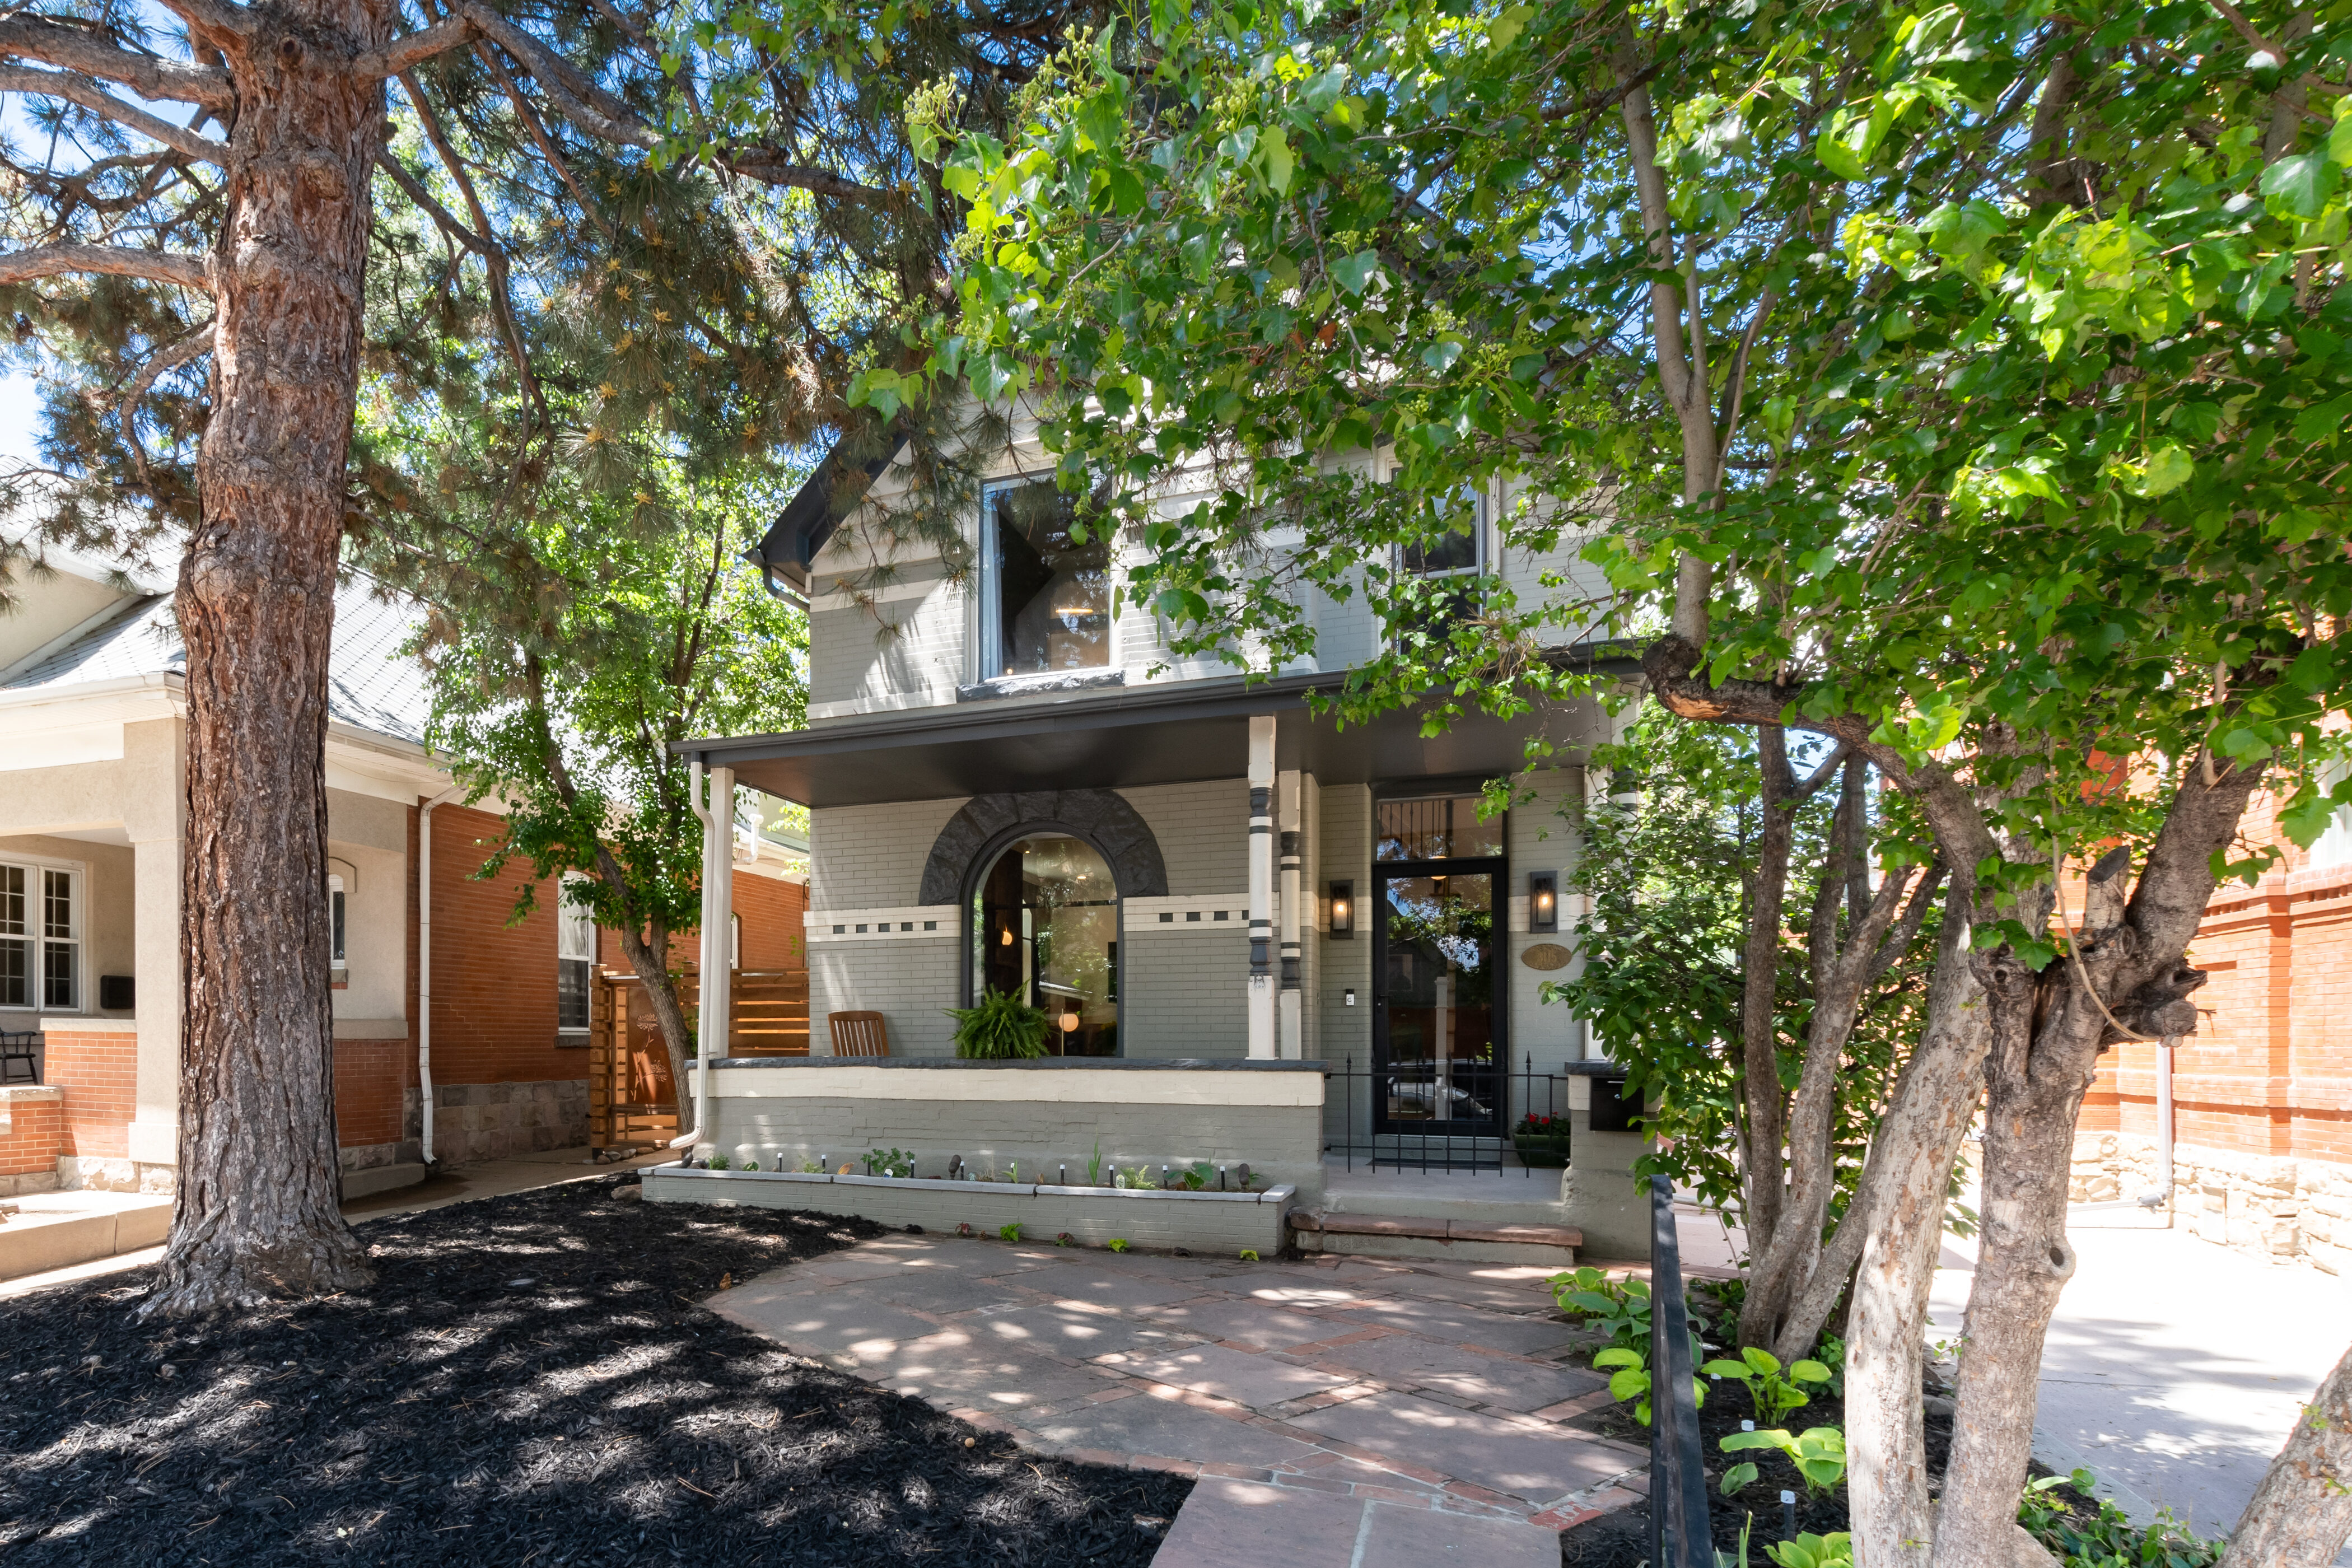 FEATURED! 3115 N Lowell Blvd, Denver, CO 80211